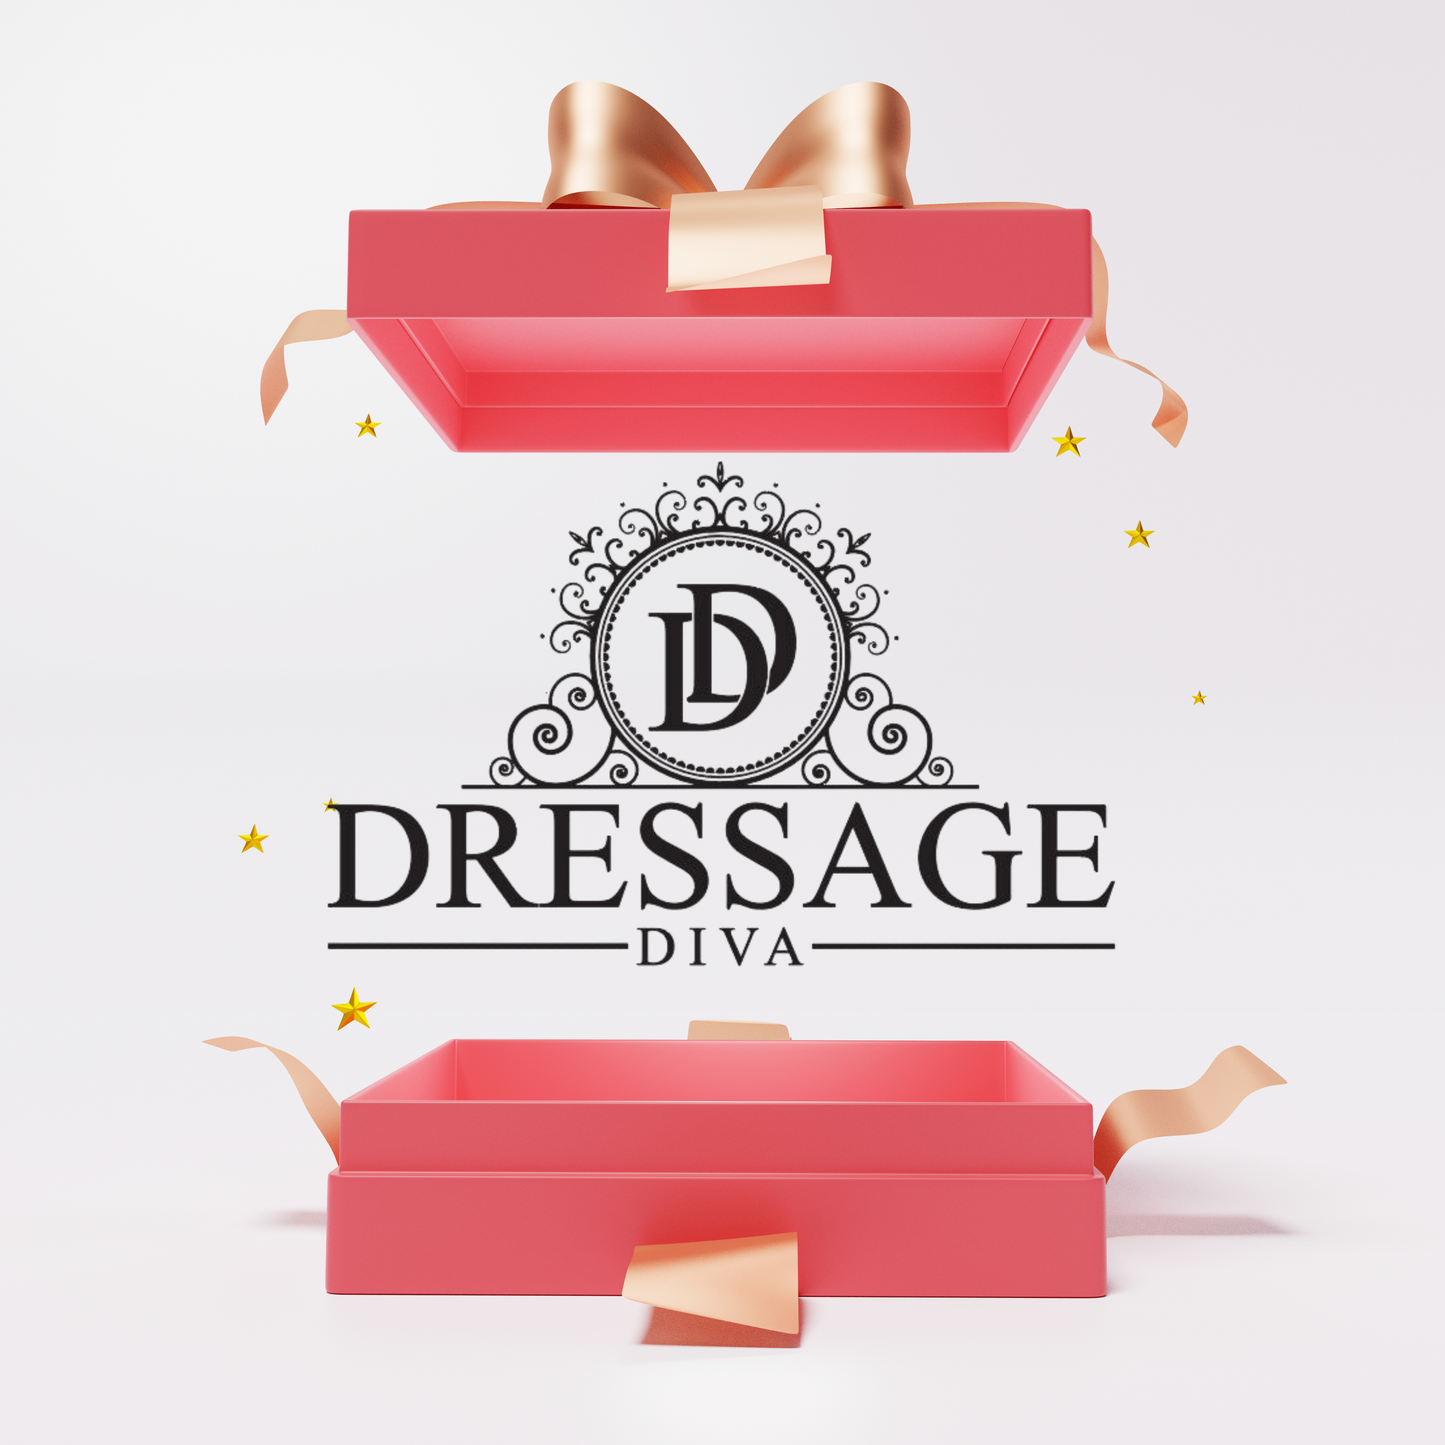 The Dressage Diva Gift Card